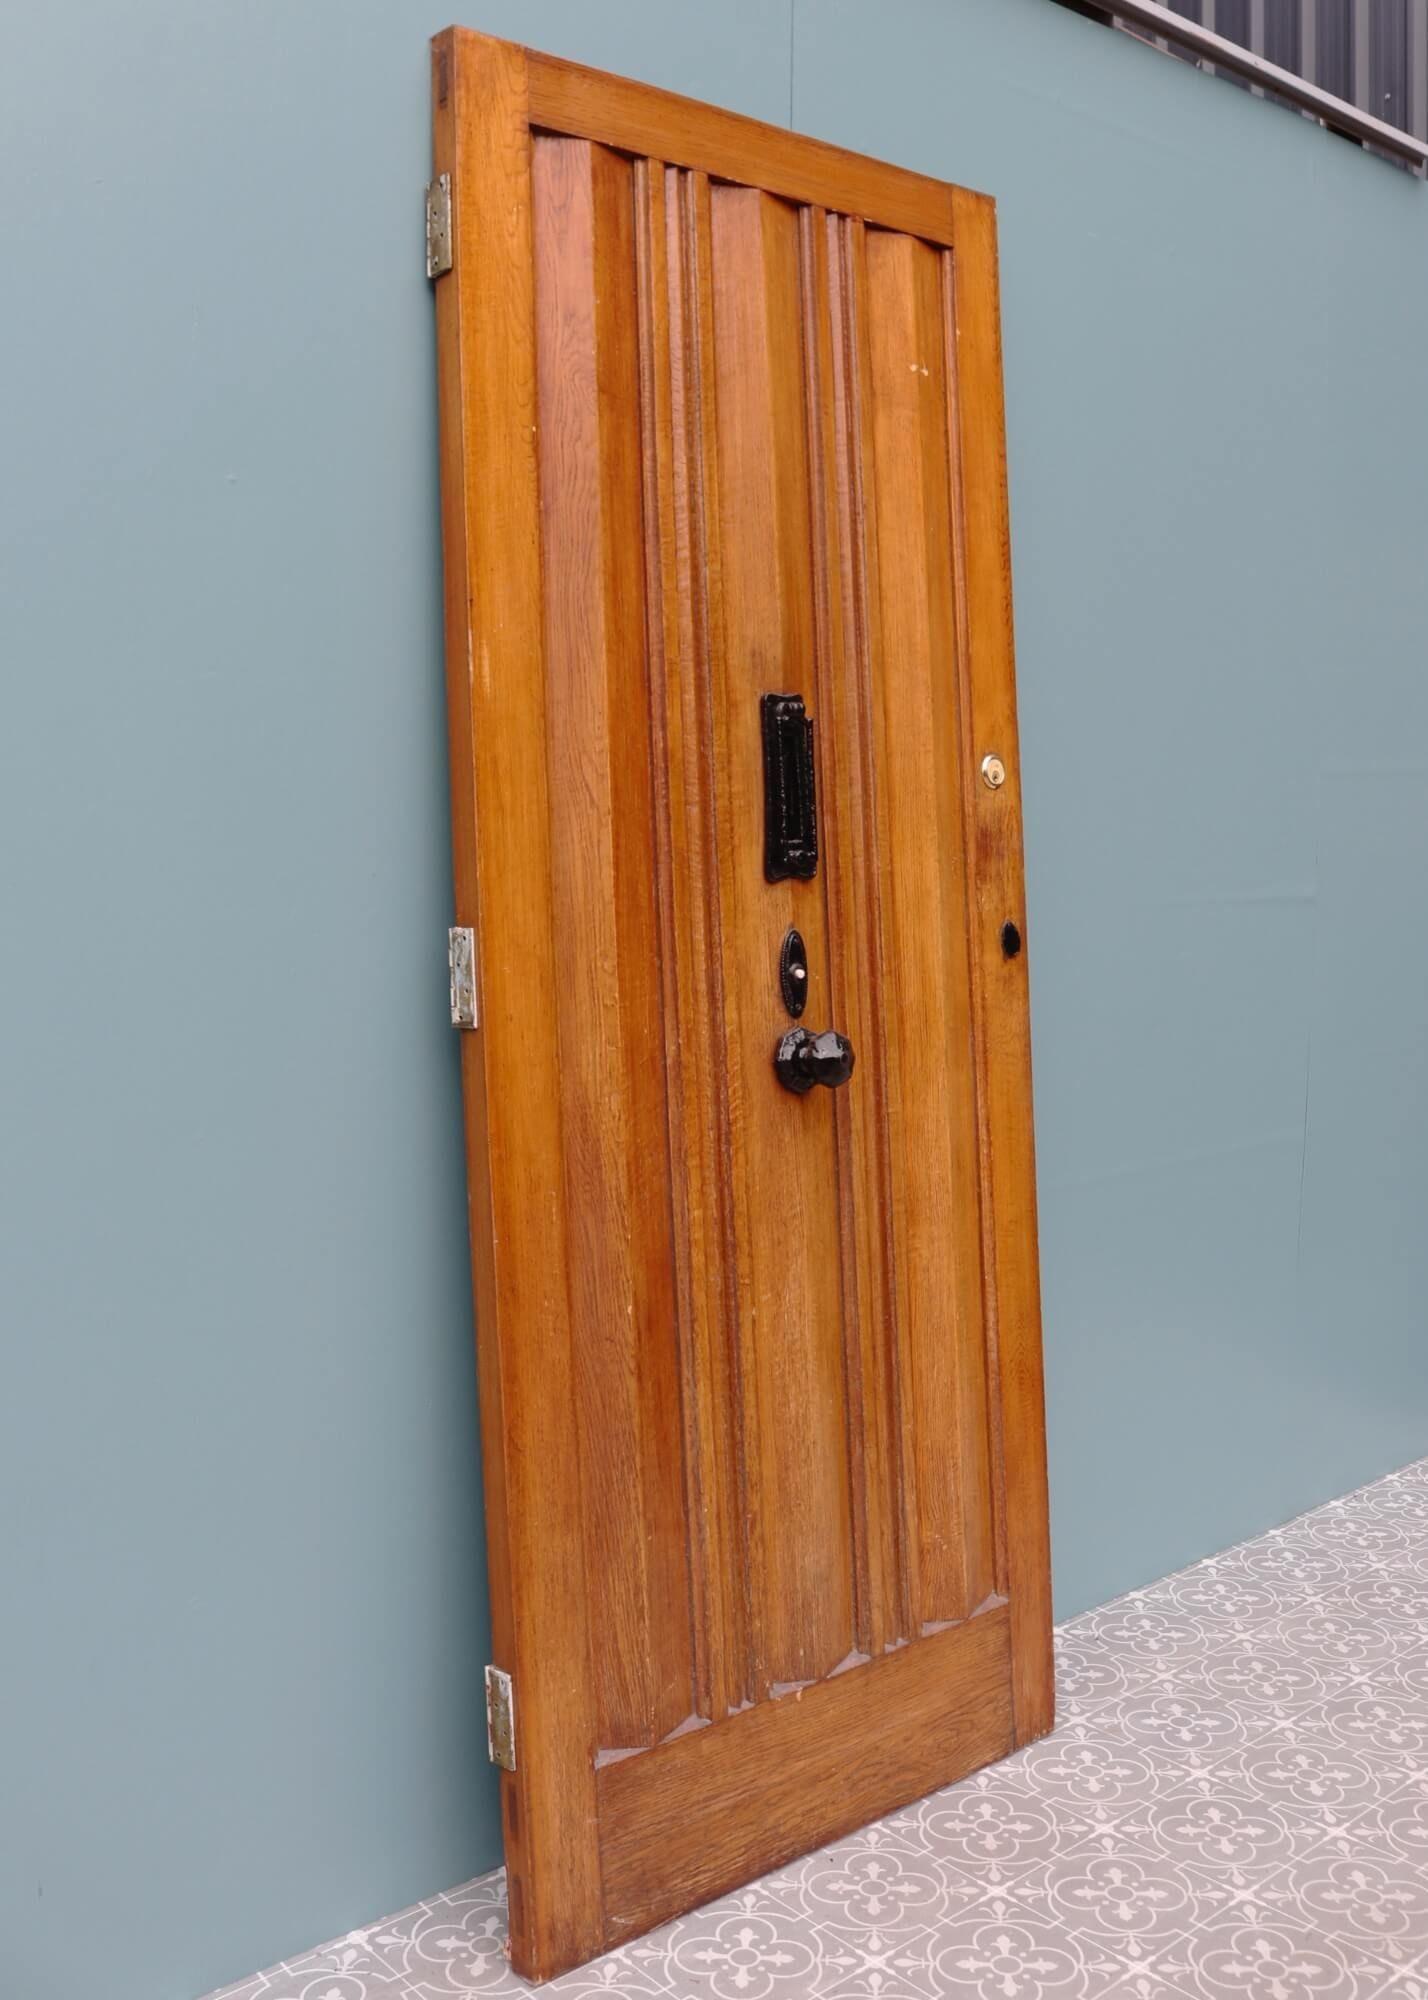 Crafted in the 1930s, this oak front door has stood the test of time for almost a century. It’s warm colour, varnished finish and stylish hardware give it a timeless appearance that makes a handsome entry in interiors period and modern alike. It